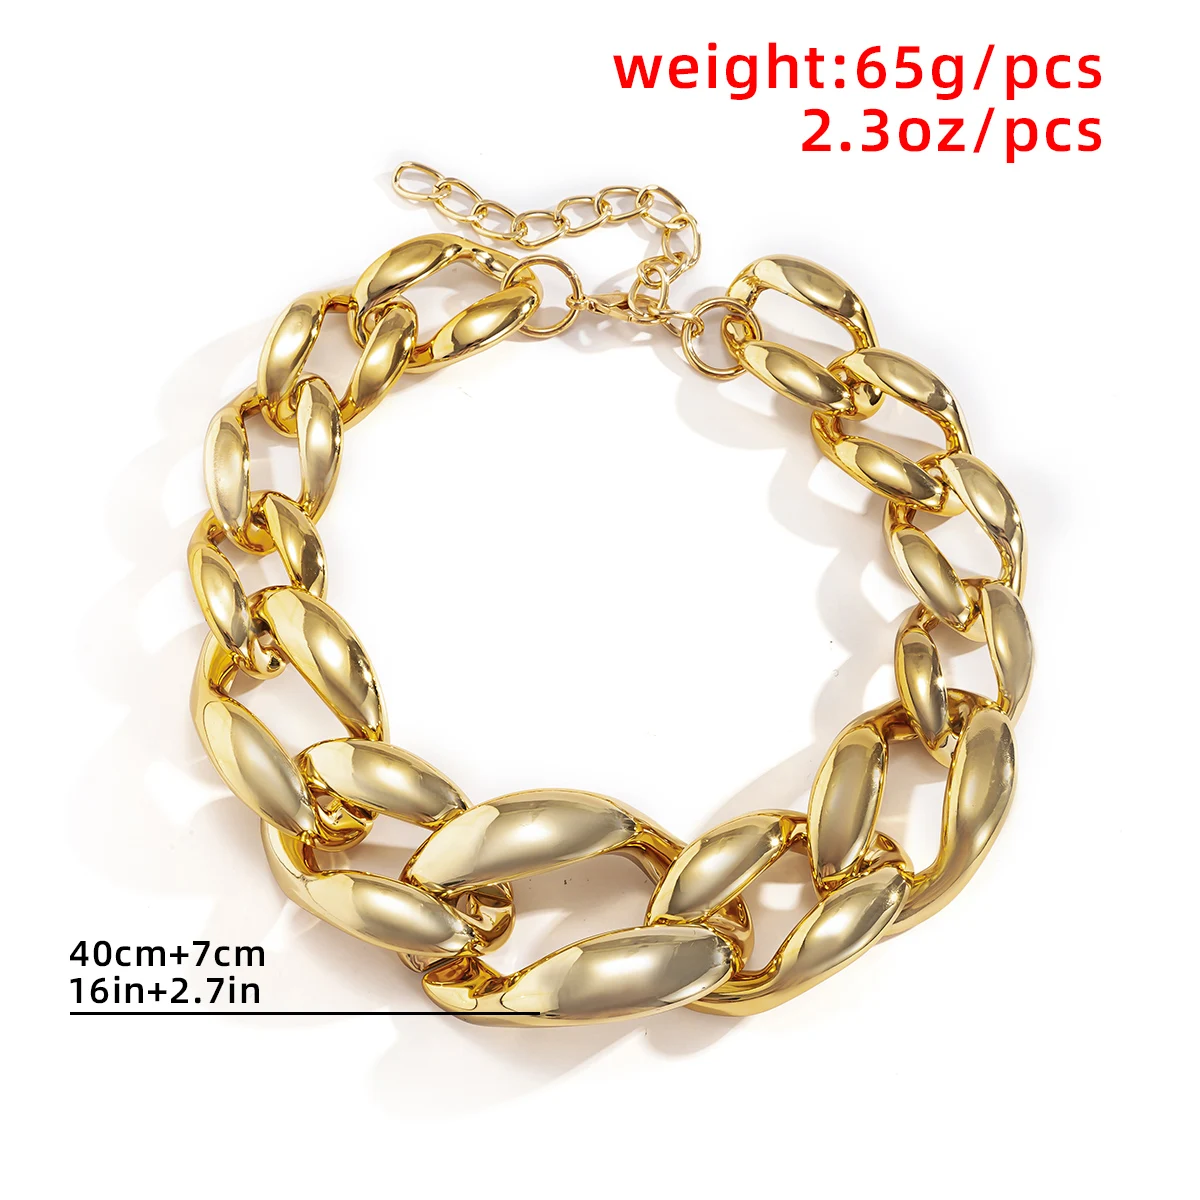 

Exaggerated Big Chunky Chain Necklace Women Collares Punk Acrylic CCB Chain Necklaces Fashion Statement Gothic Men Jewelry 2021